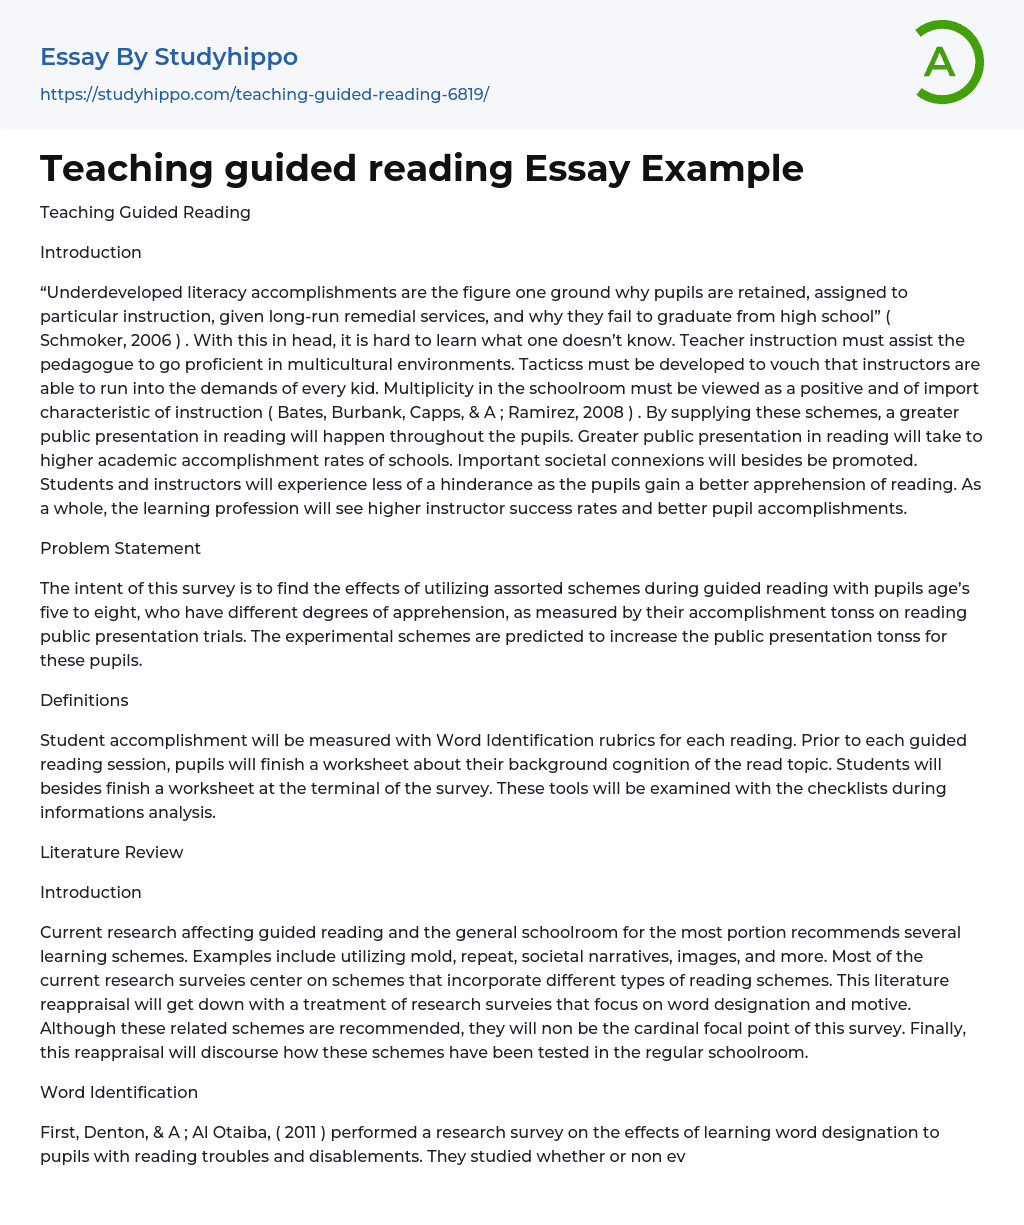 Teaching guided reading Essay Example